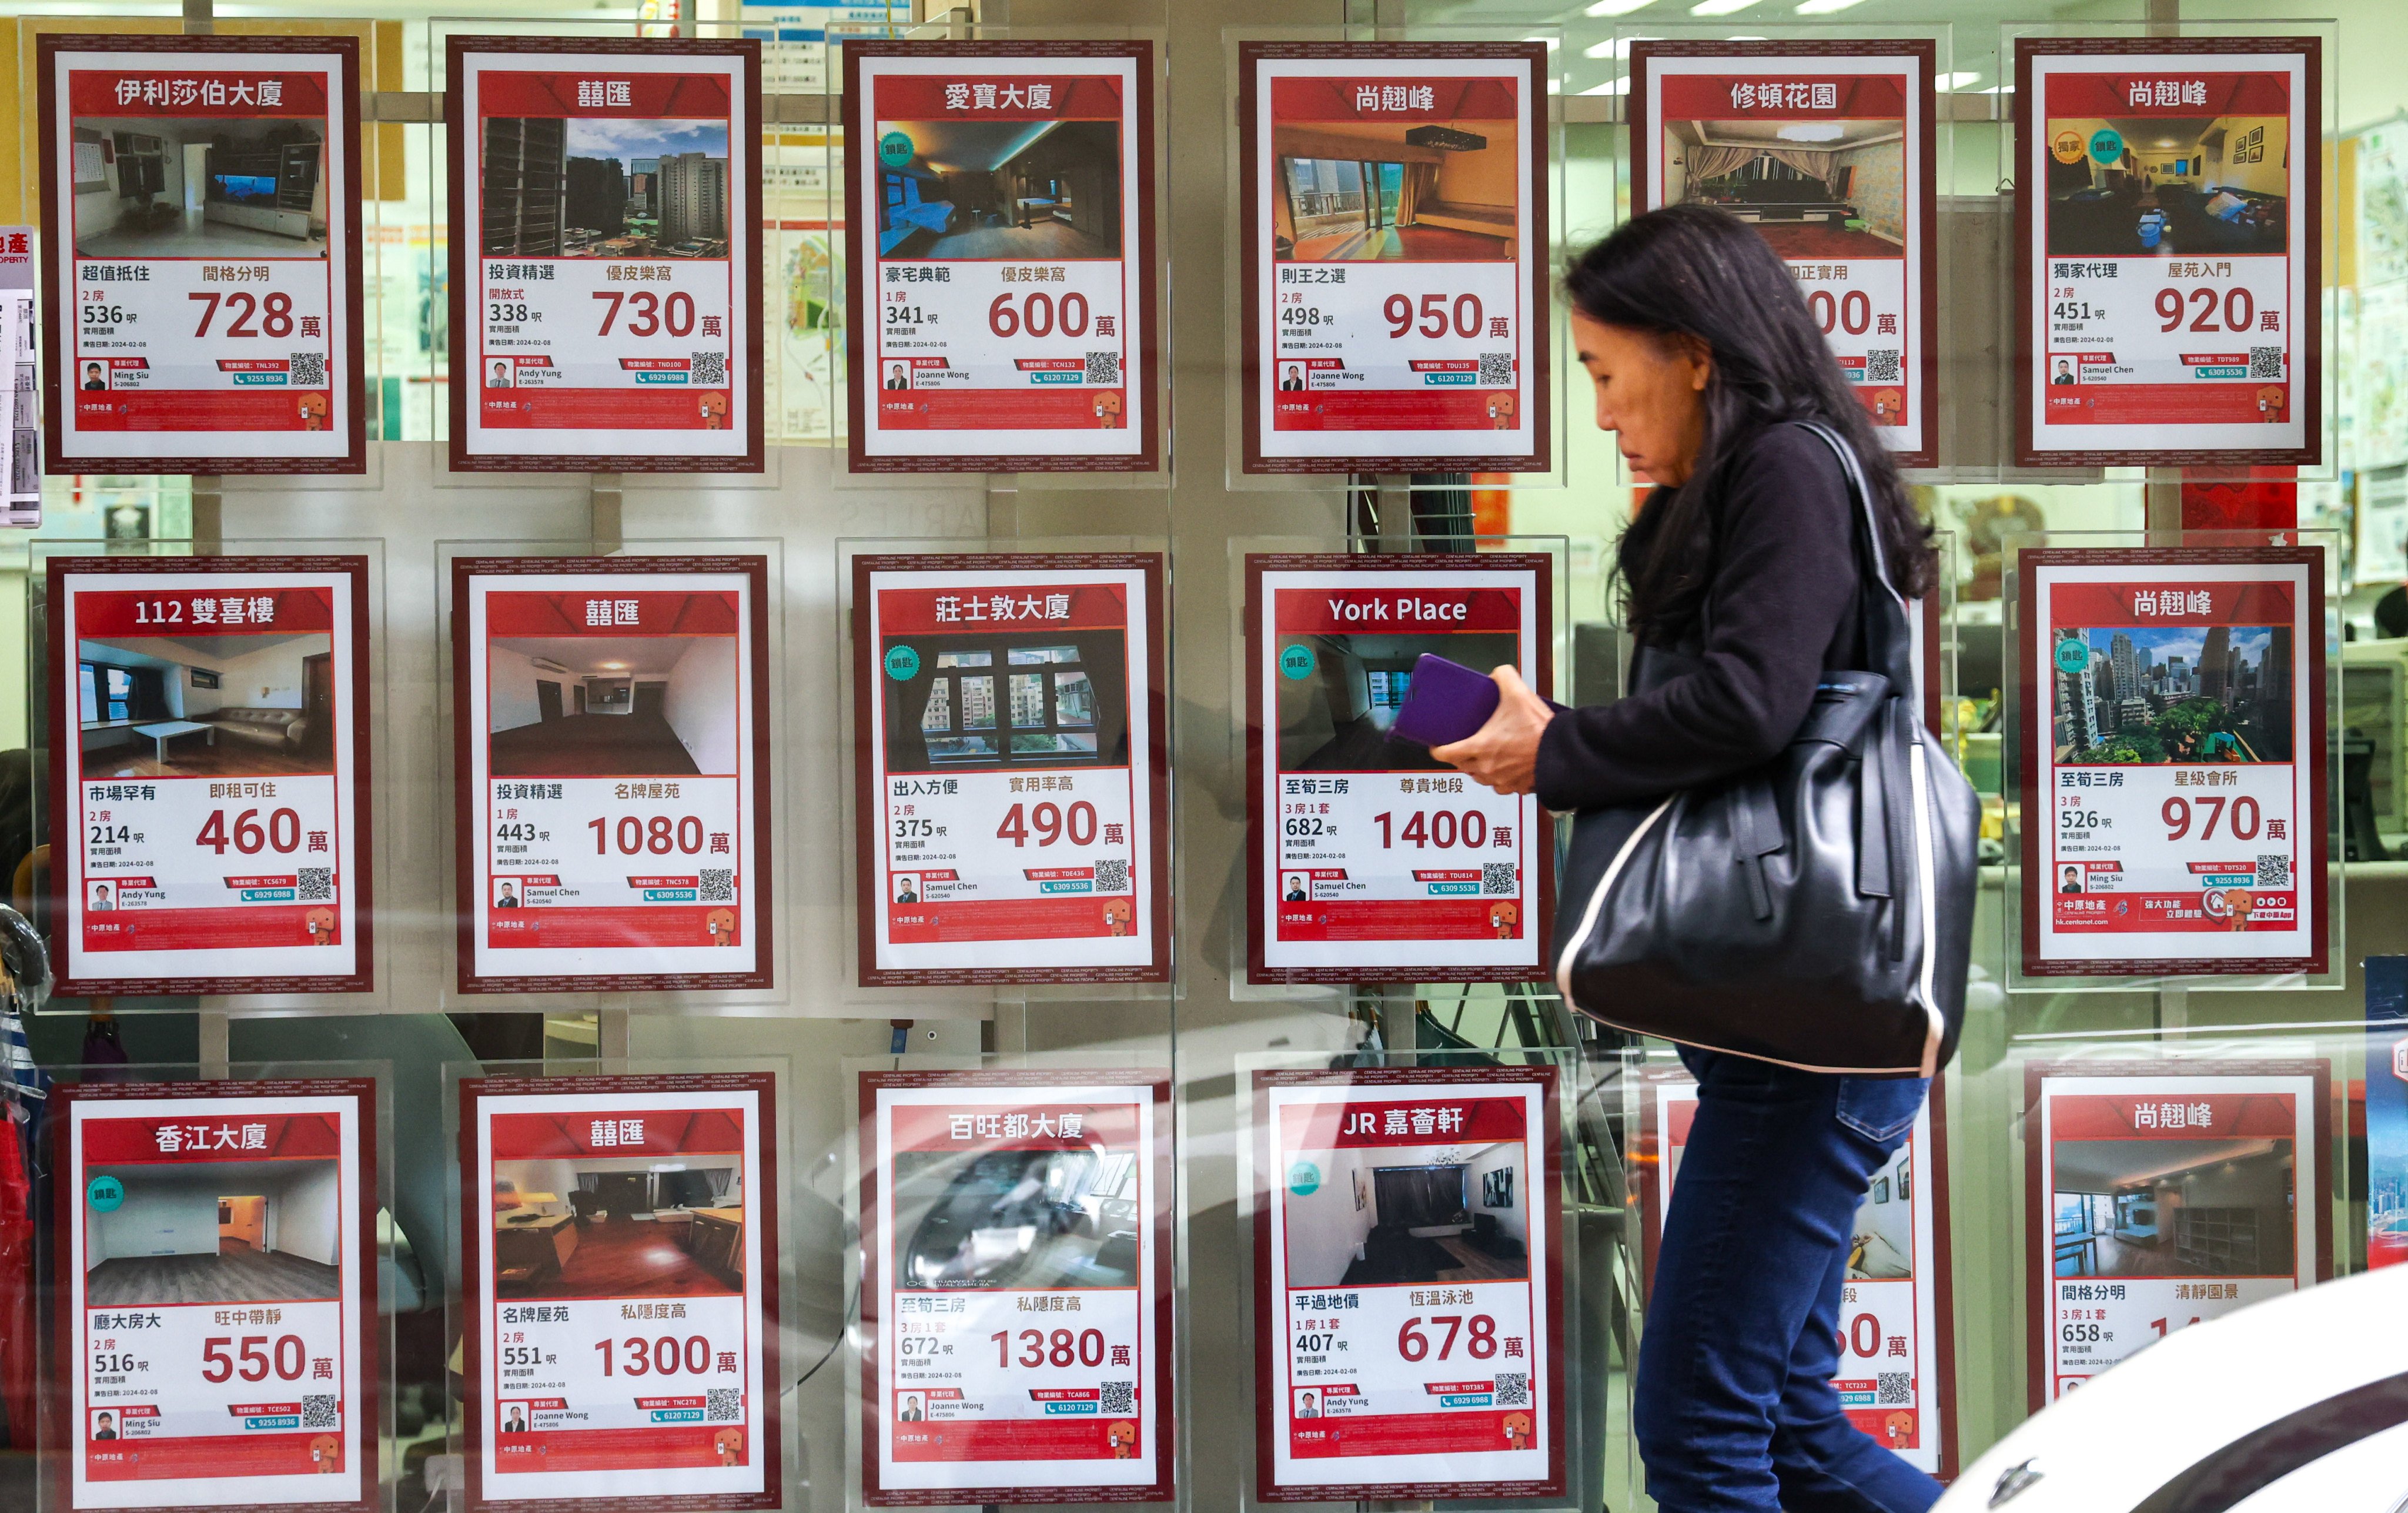 Almost three quarters of the wealthier respondents expressed an interest in buying a property, versus 62 per cent of their less well-heeled peers. Photo: Jelly Tse